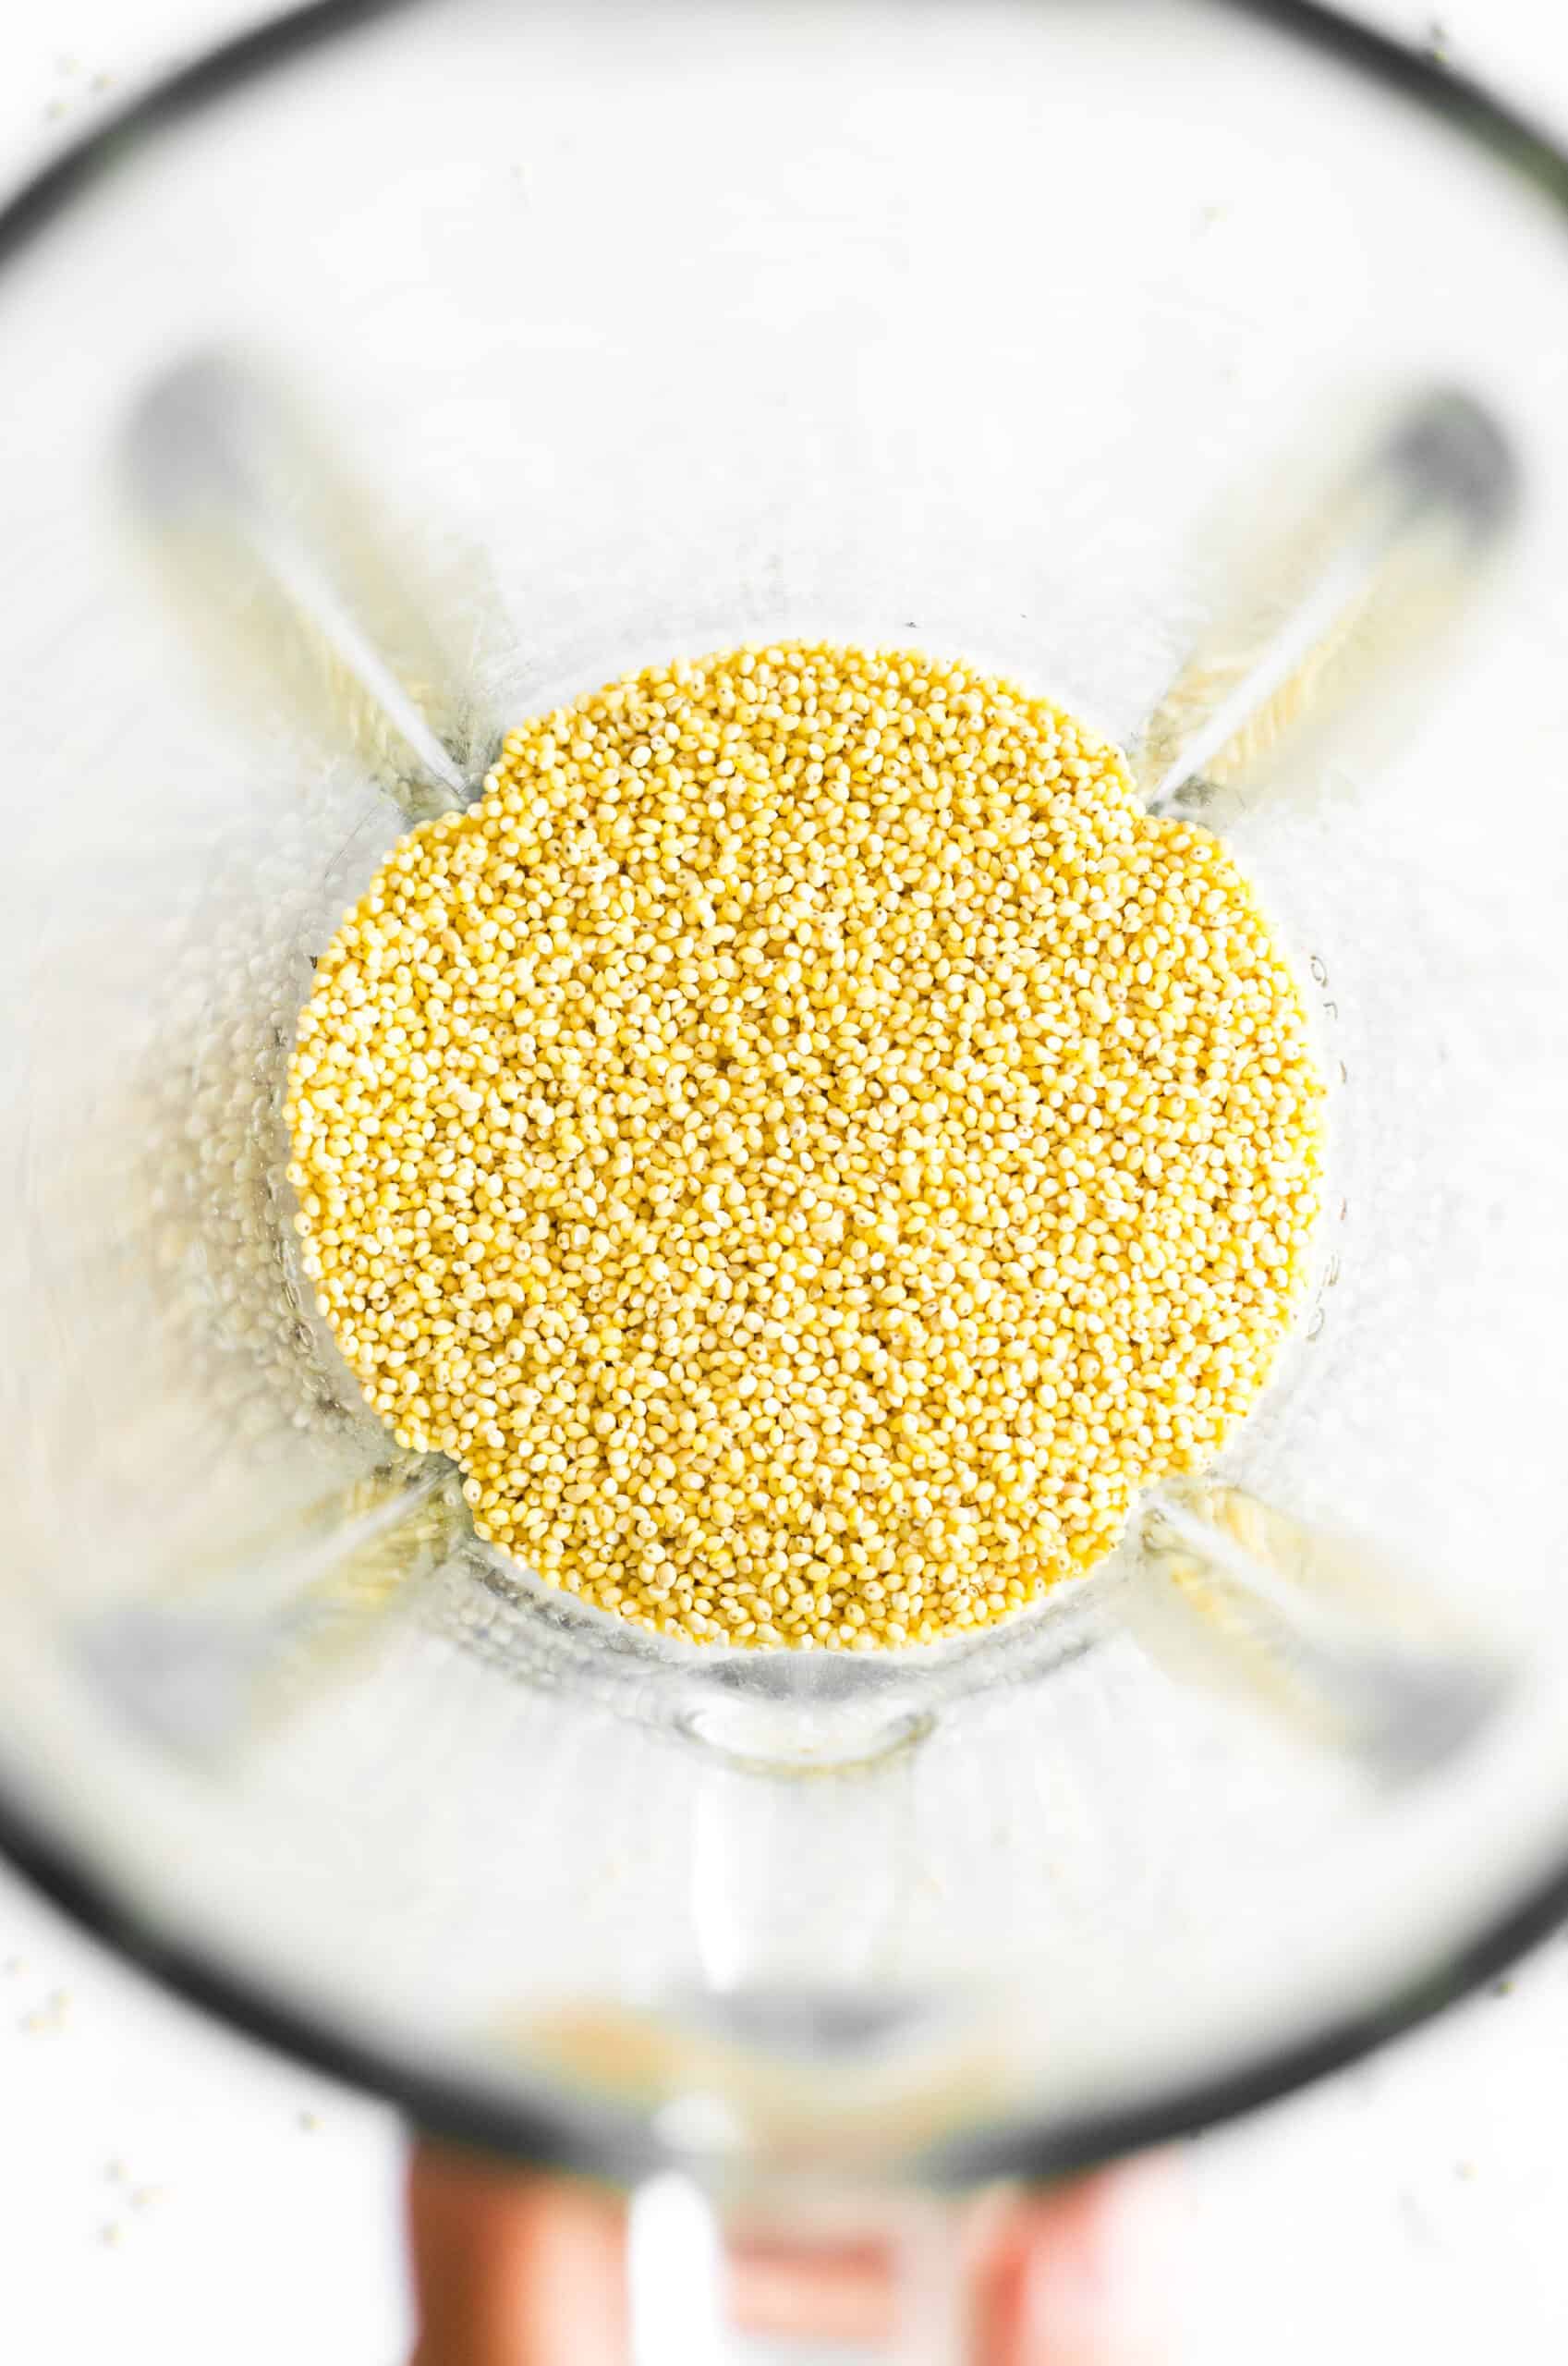 Hulled millet seeds in the bowl of a high-speed blender.